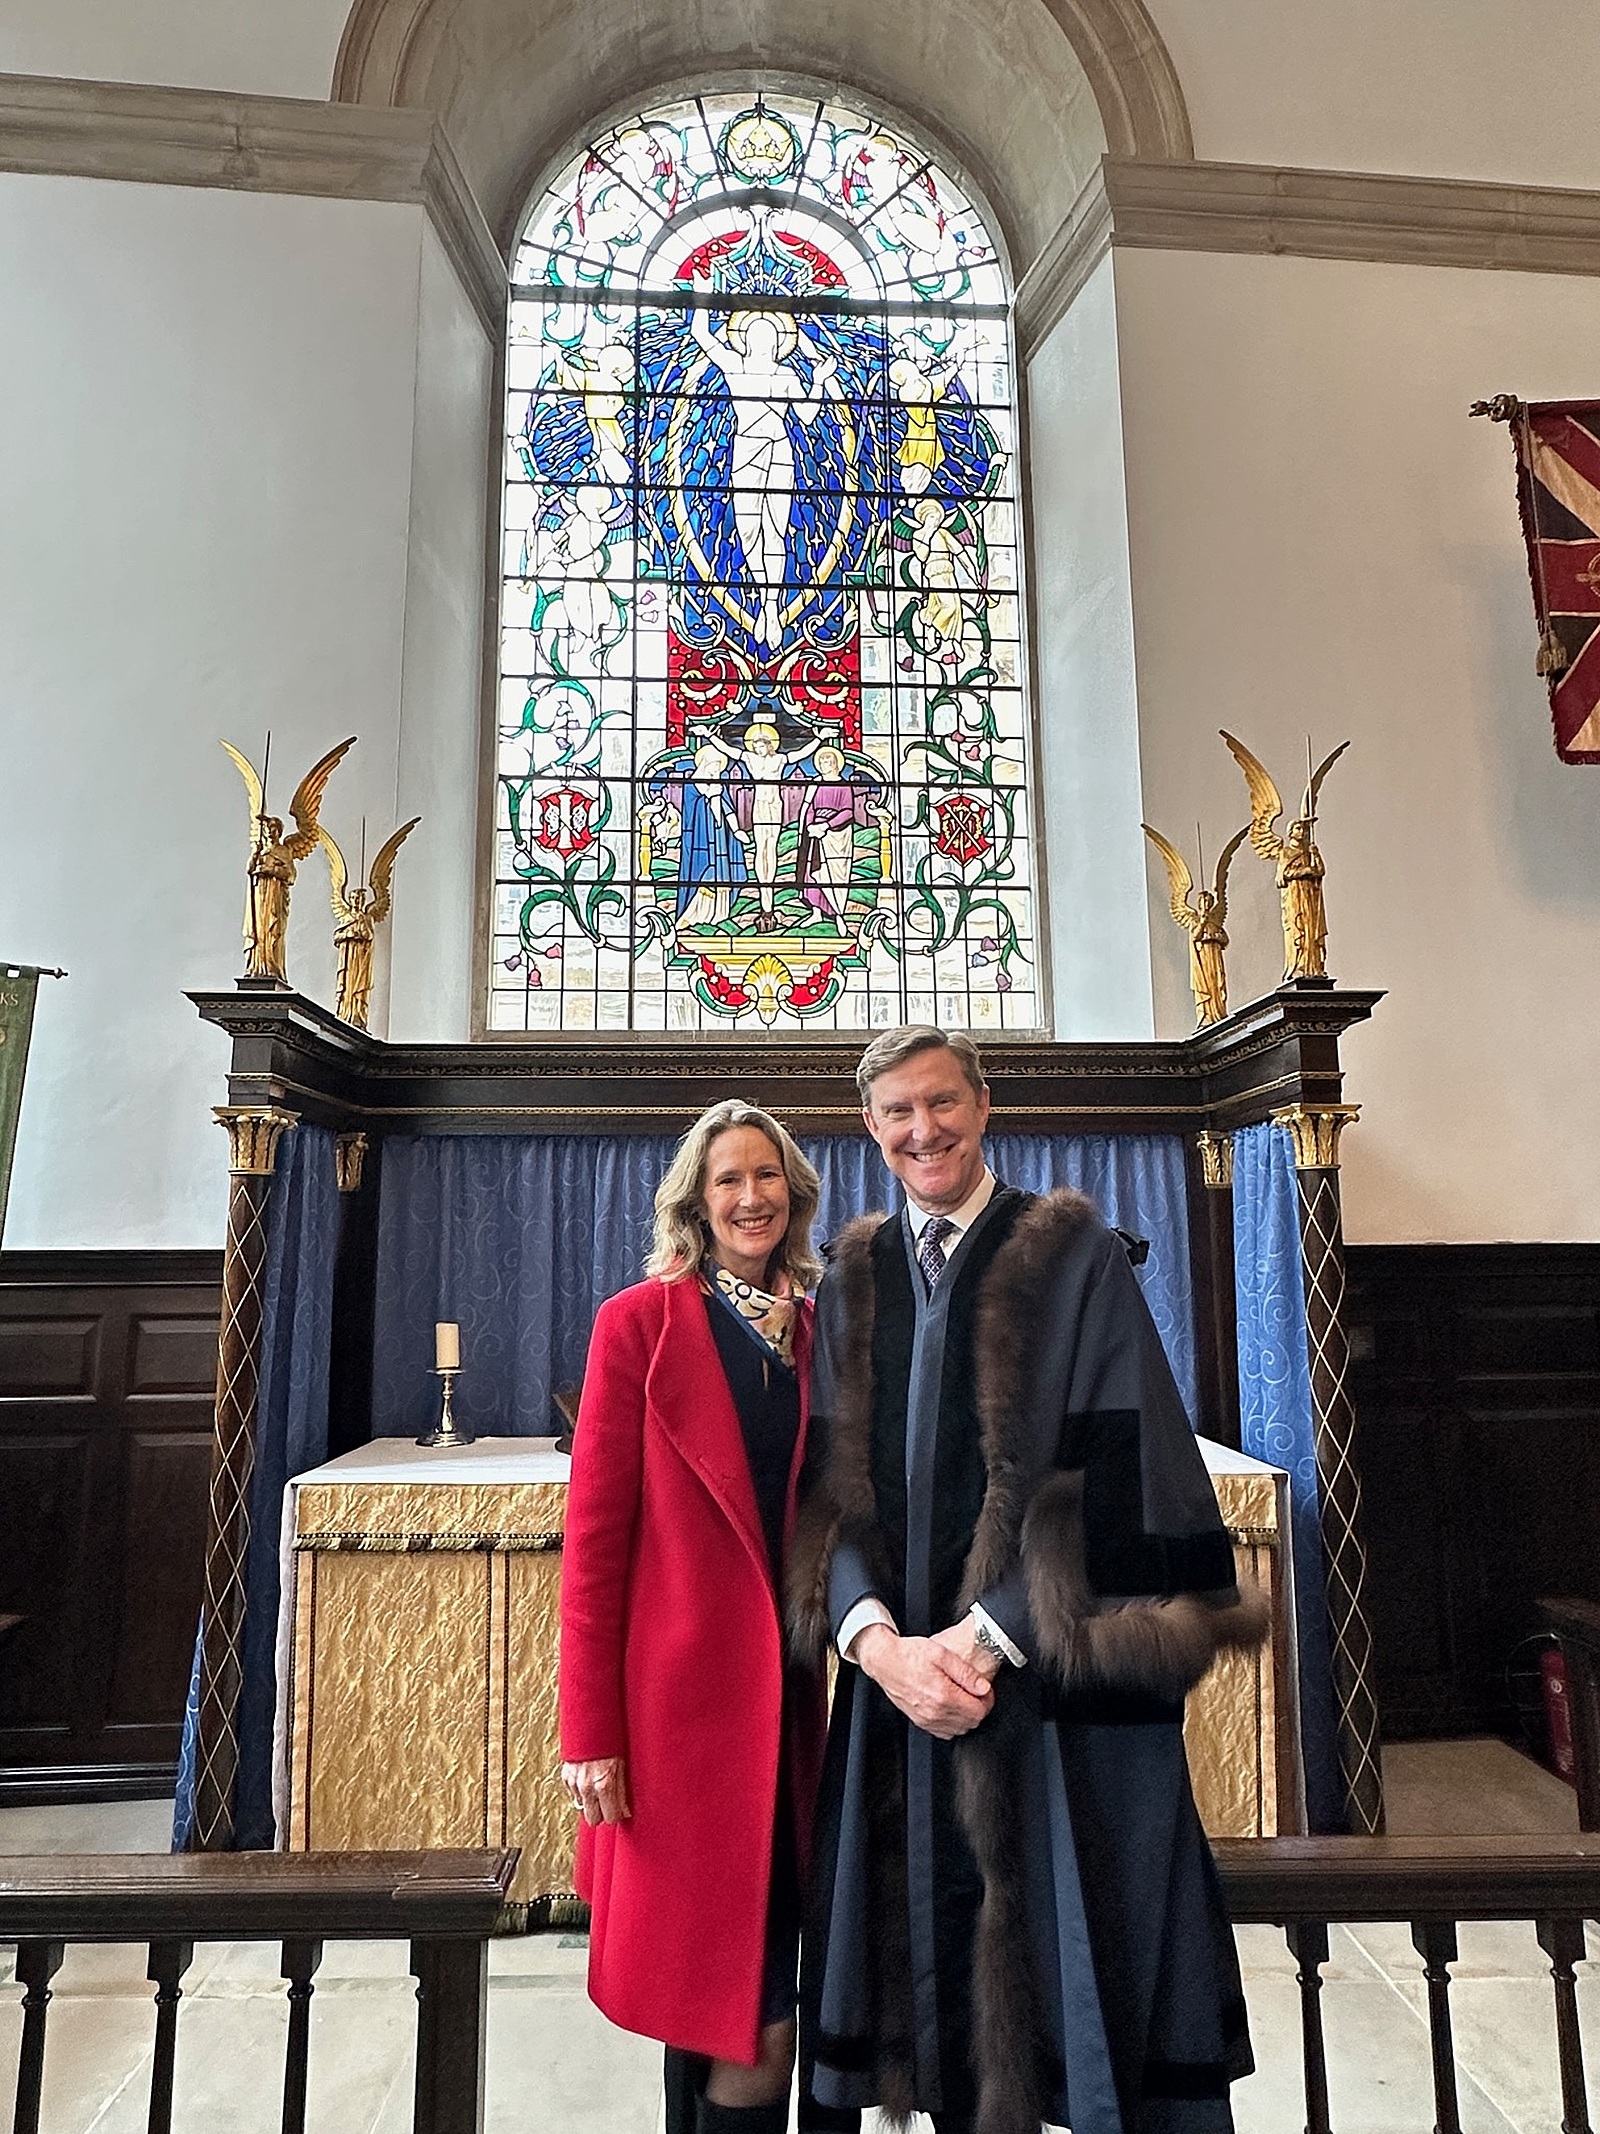 Alderman Robert Hughes-Penney, alongside his wife Elspeth Hughes-Penney, was re-elected as Alderman for the Ward of Cheap during the Wardmote election at the Commonwealth Chapel in the church of St. Lawrence Jewry."